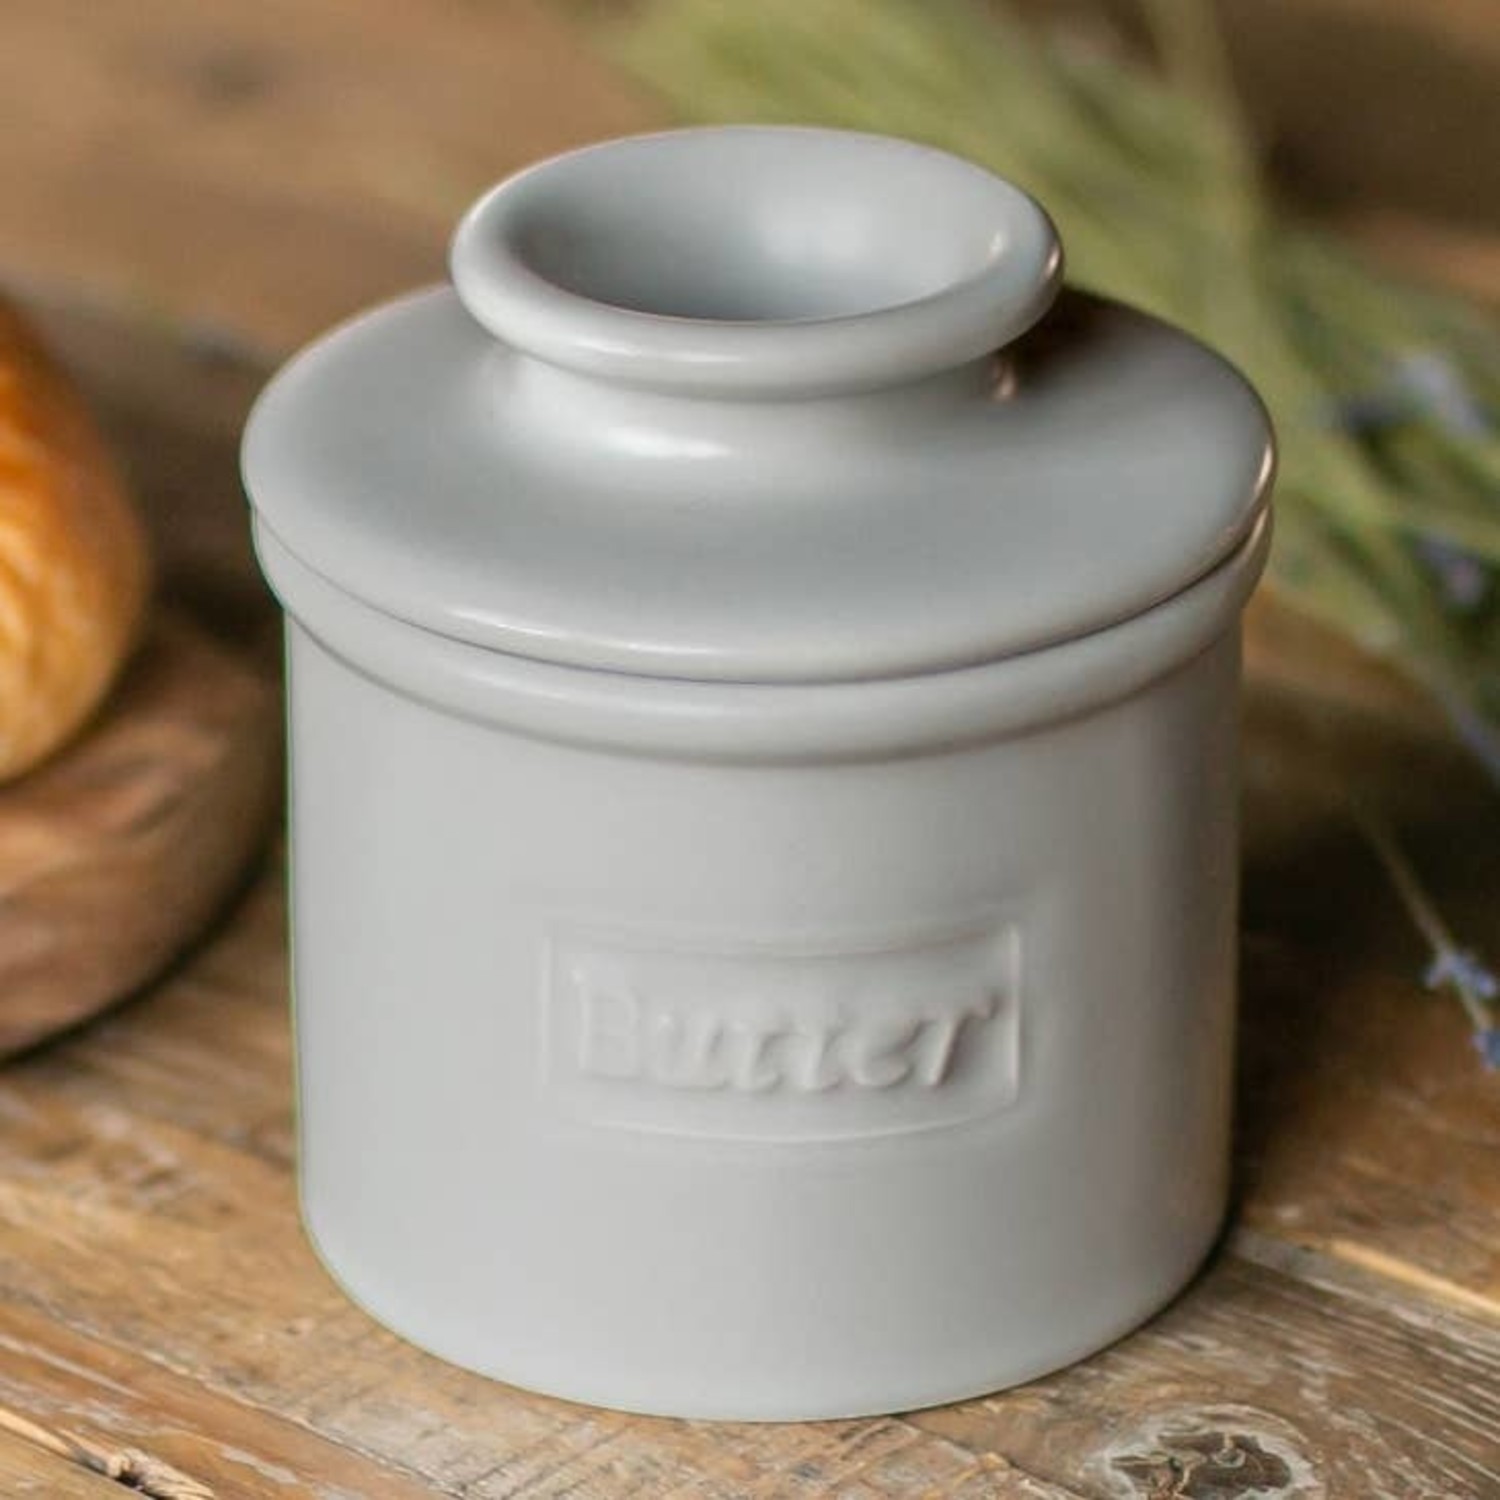 How To Use A Butter Bell or Butter Crock And Why 